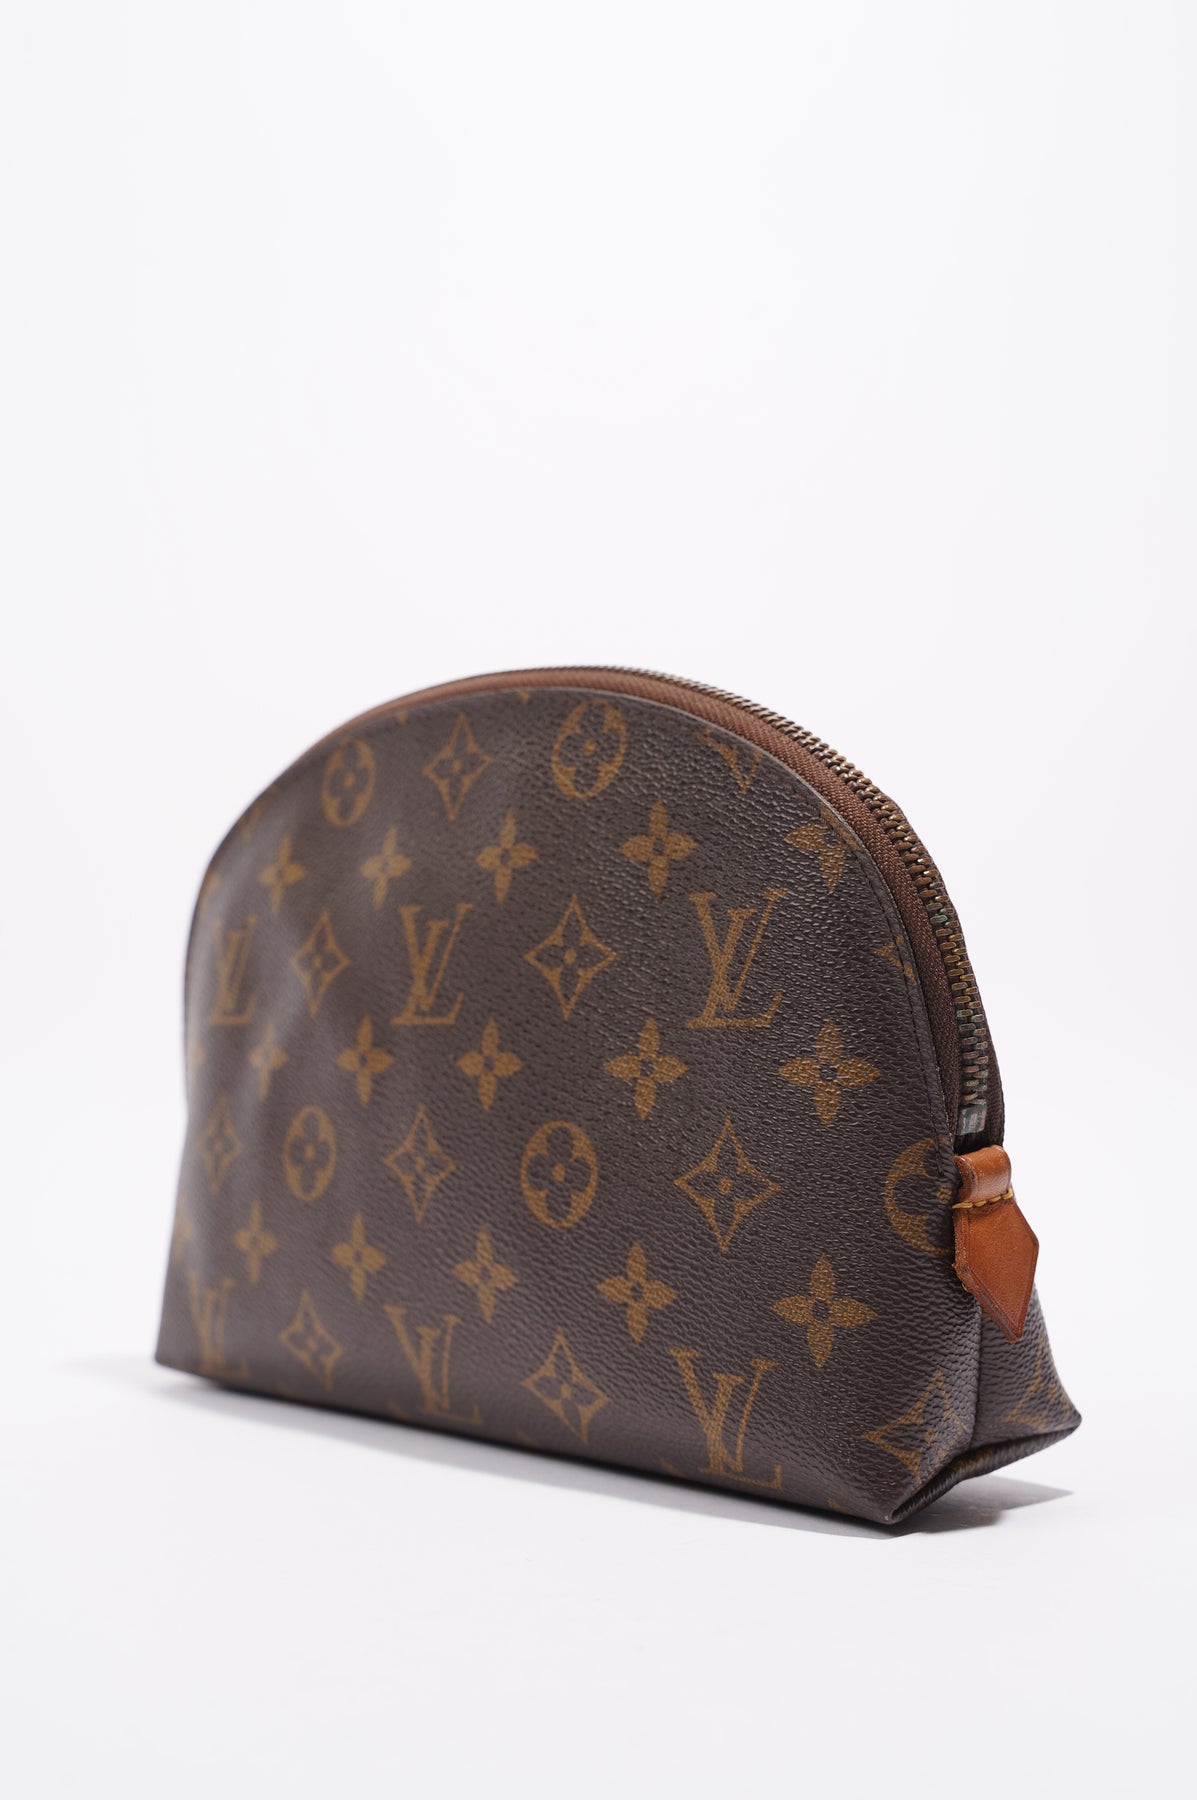 LOUIS VUITTON COSMETIC POUCH PM REVIEW